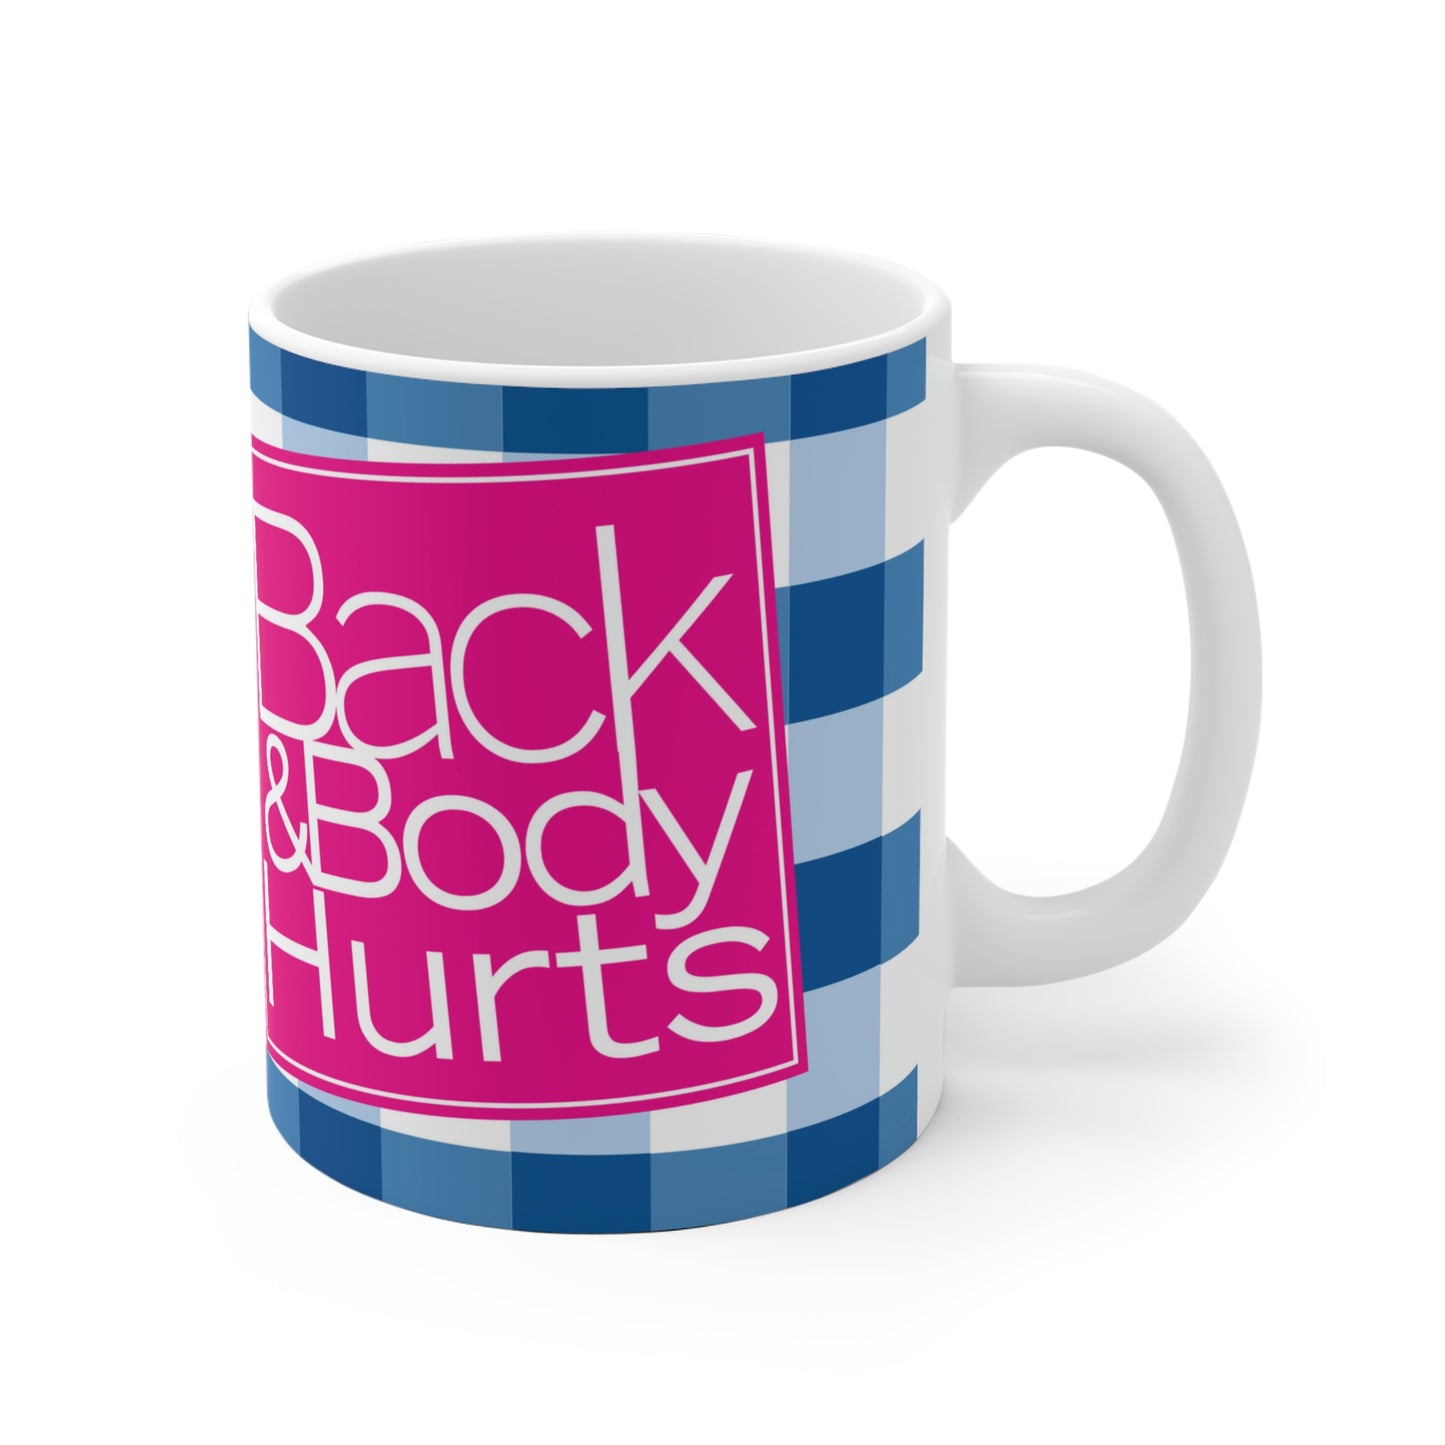 Back & Body Hurts Mug - Perfect gift for everyone Gifts for Mother's Day, Friends, Grandparents, Teachers, Employee funny mug